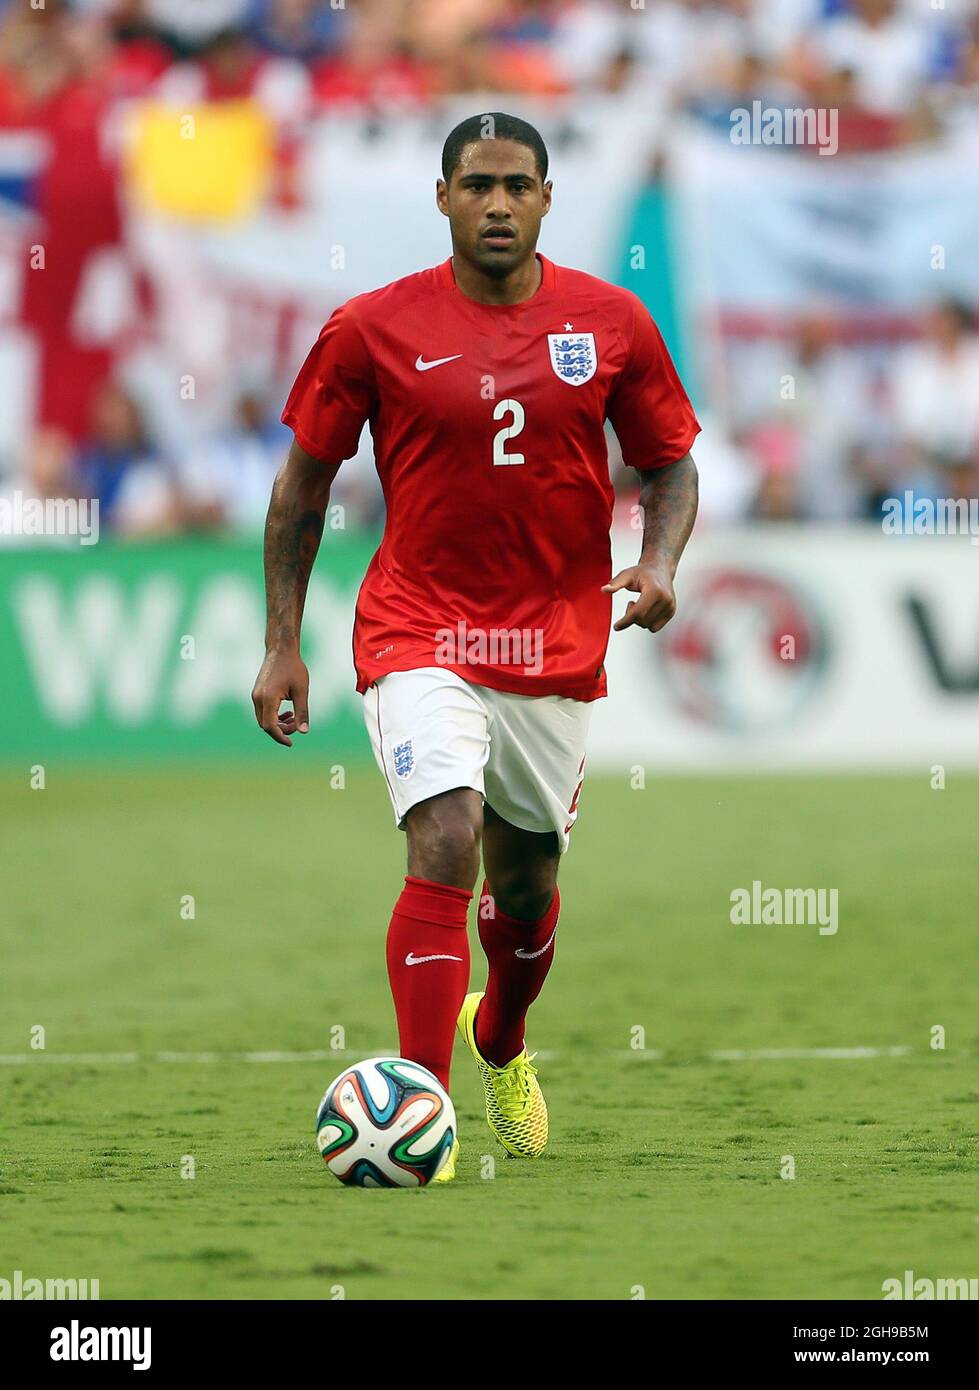 England's Glen Johnson in action during the international friendly soccer match between England and Honduras at Sun Life Stadium in Miami, Florida on June 7, 2014. Pic David Klein. Stock Photo